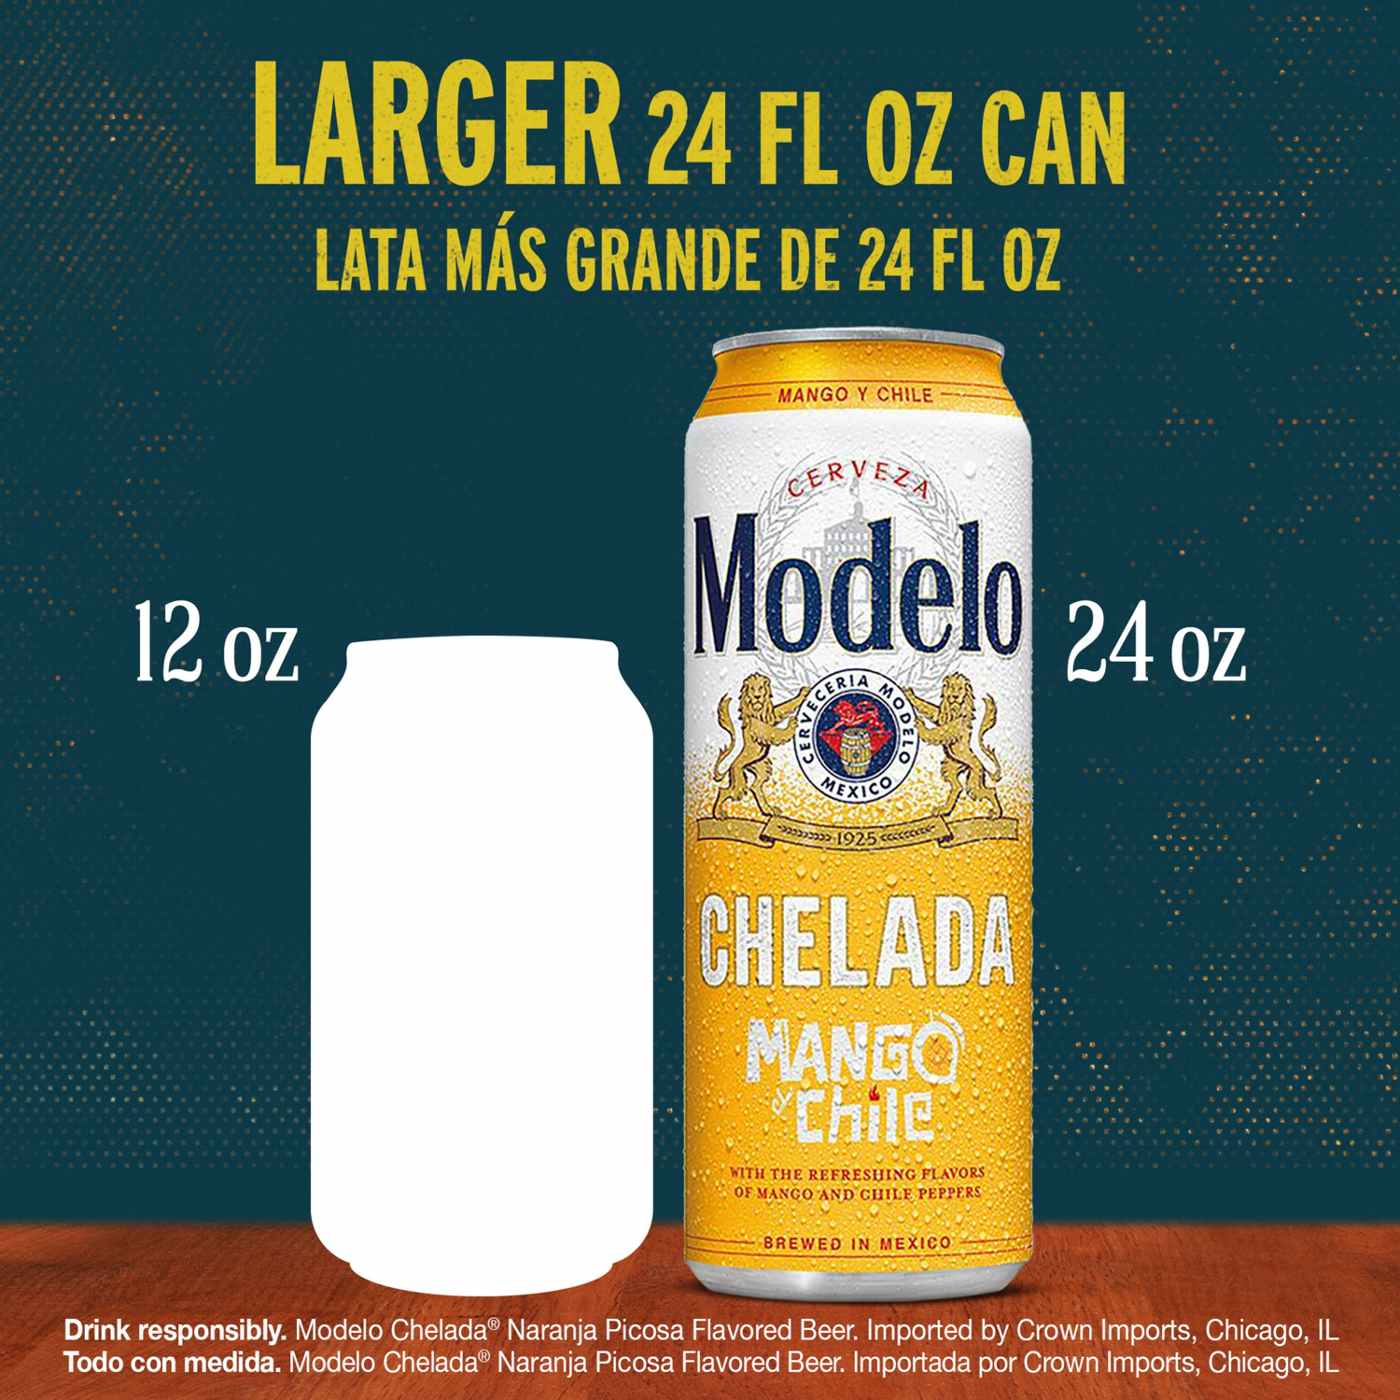 Modelo Chelada Mango y Chile Mexican Import Flavored Beer 24 oz Can; image 7 of 9